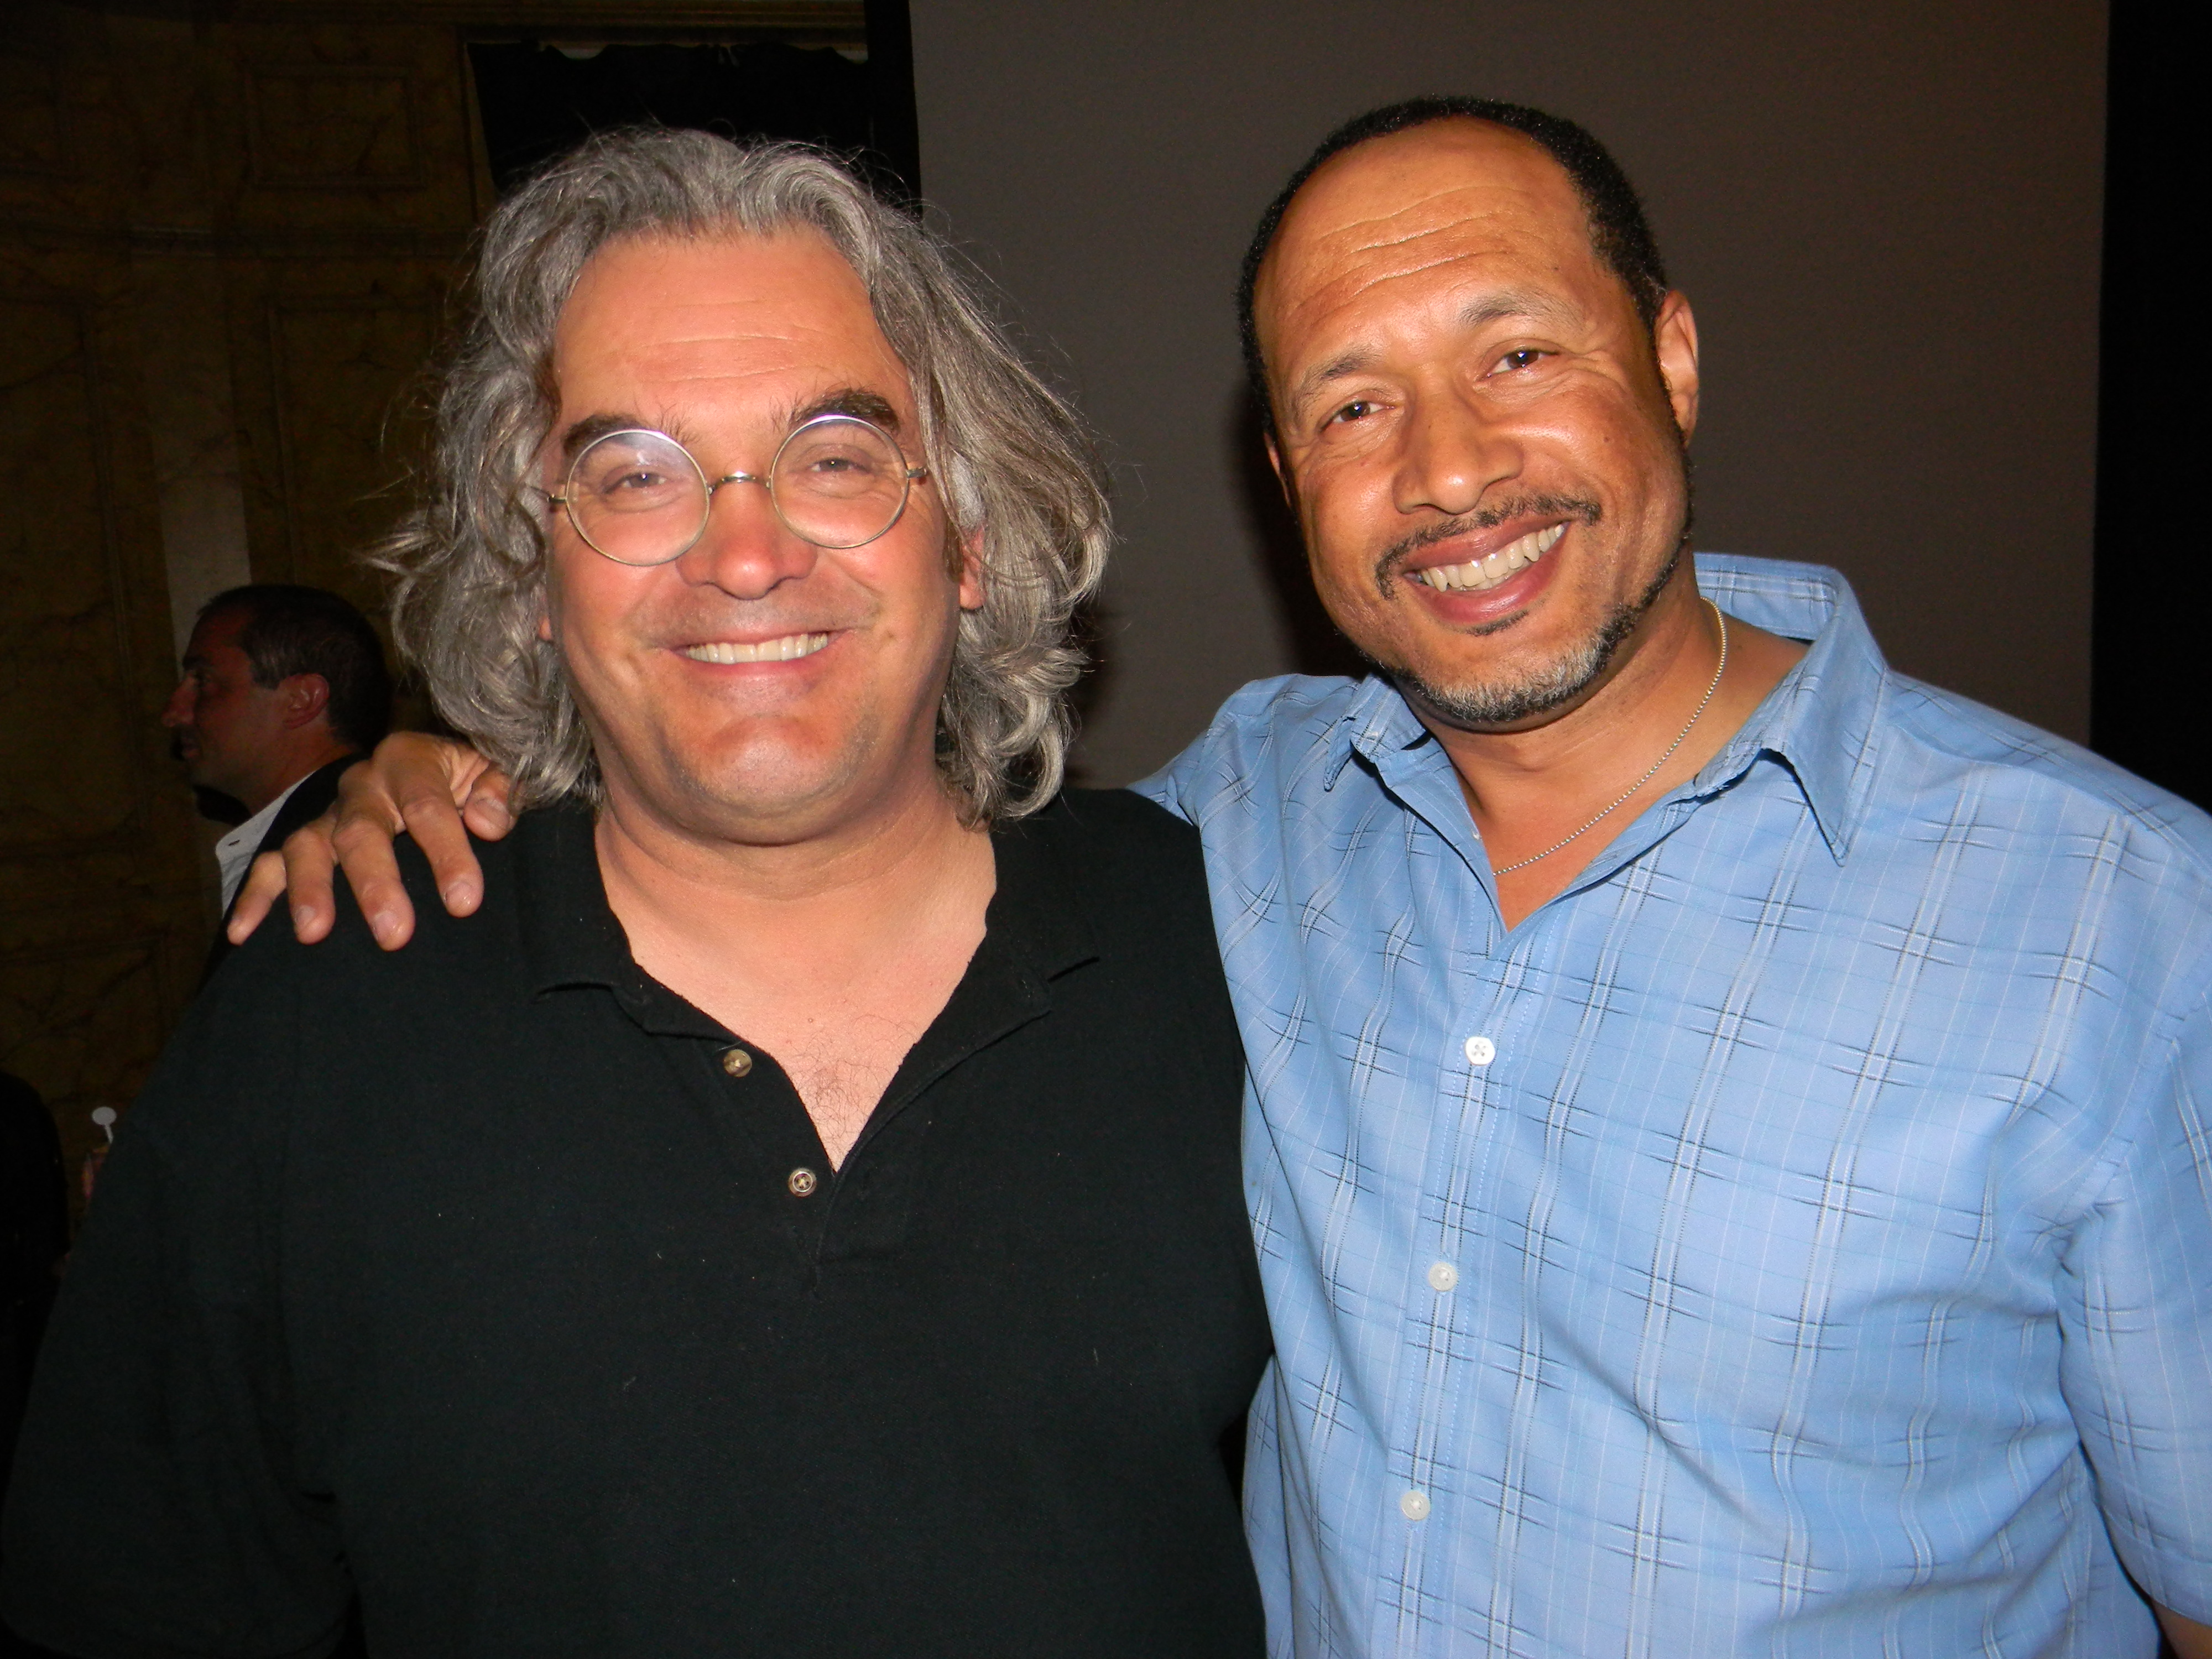 Paul Greengrass & Mark Holden just after shooting wrapped in Malta on Captain Phillips.